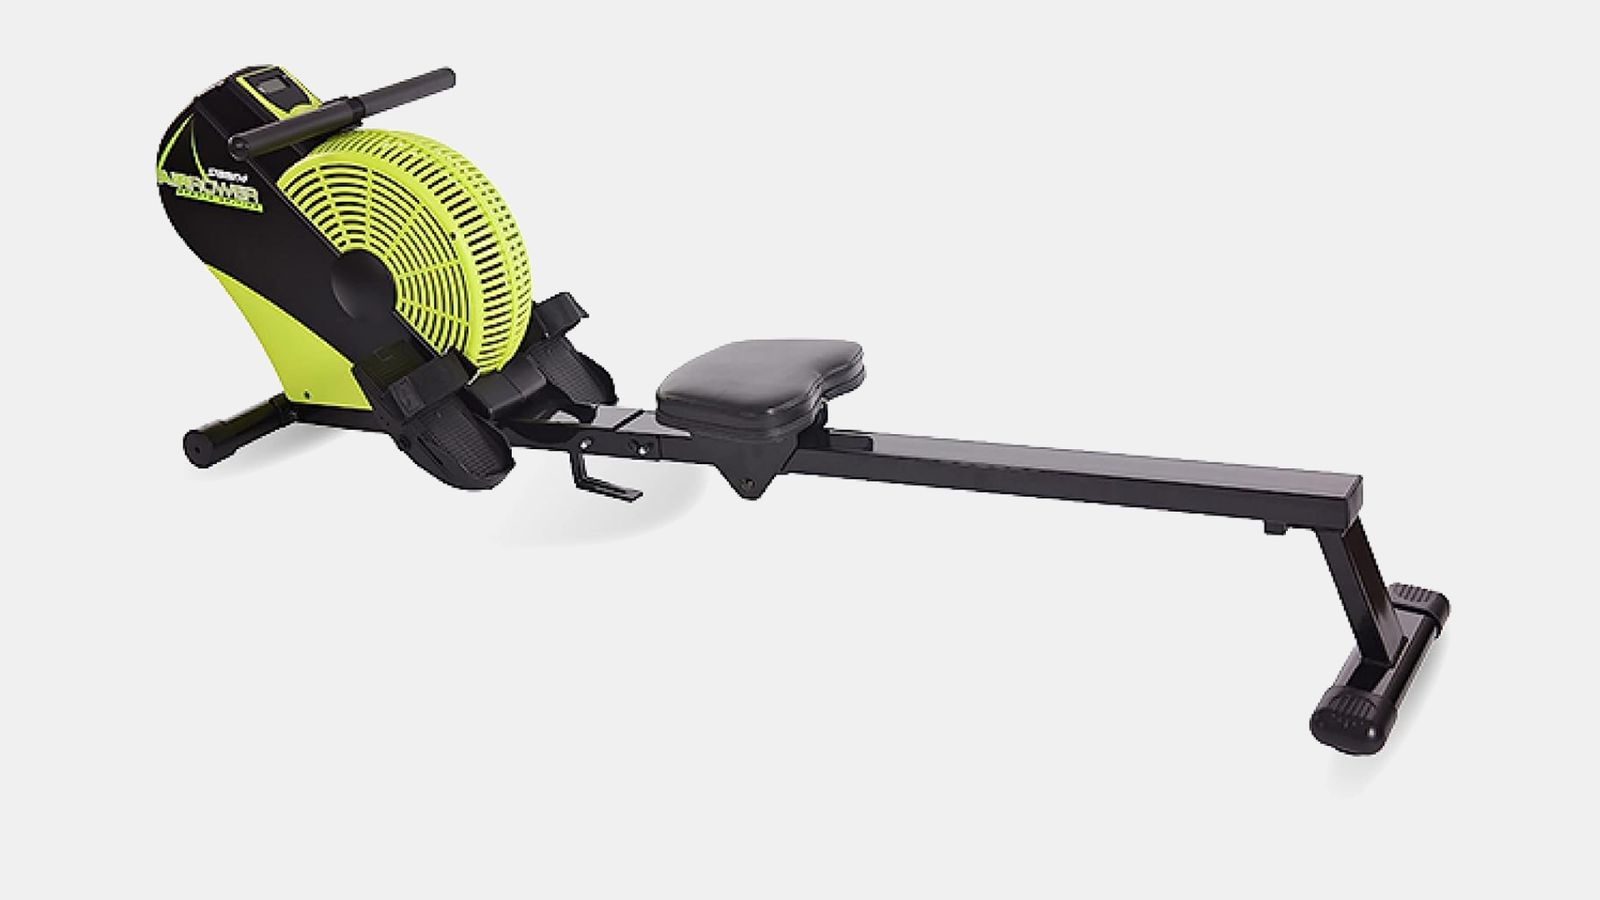 Stamina ATS Air Rower product image of a black and highlighter yellow rowing machine.